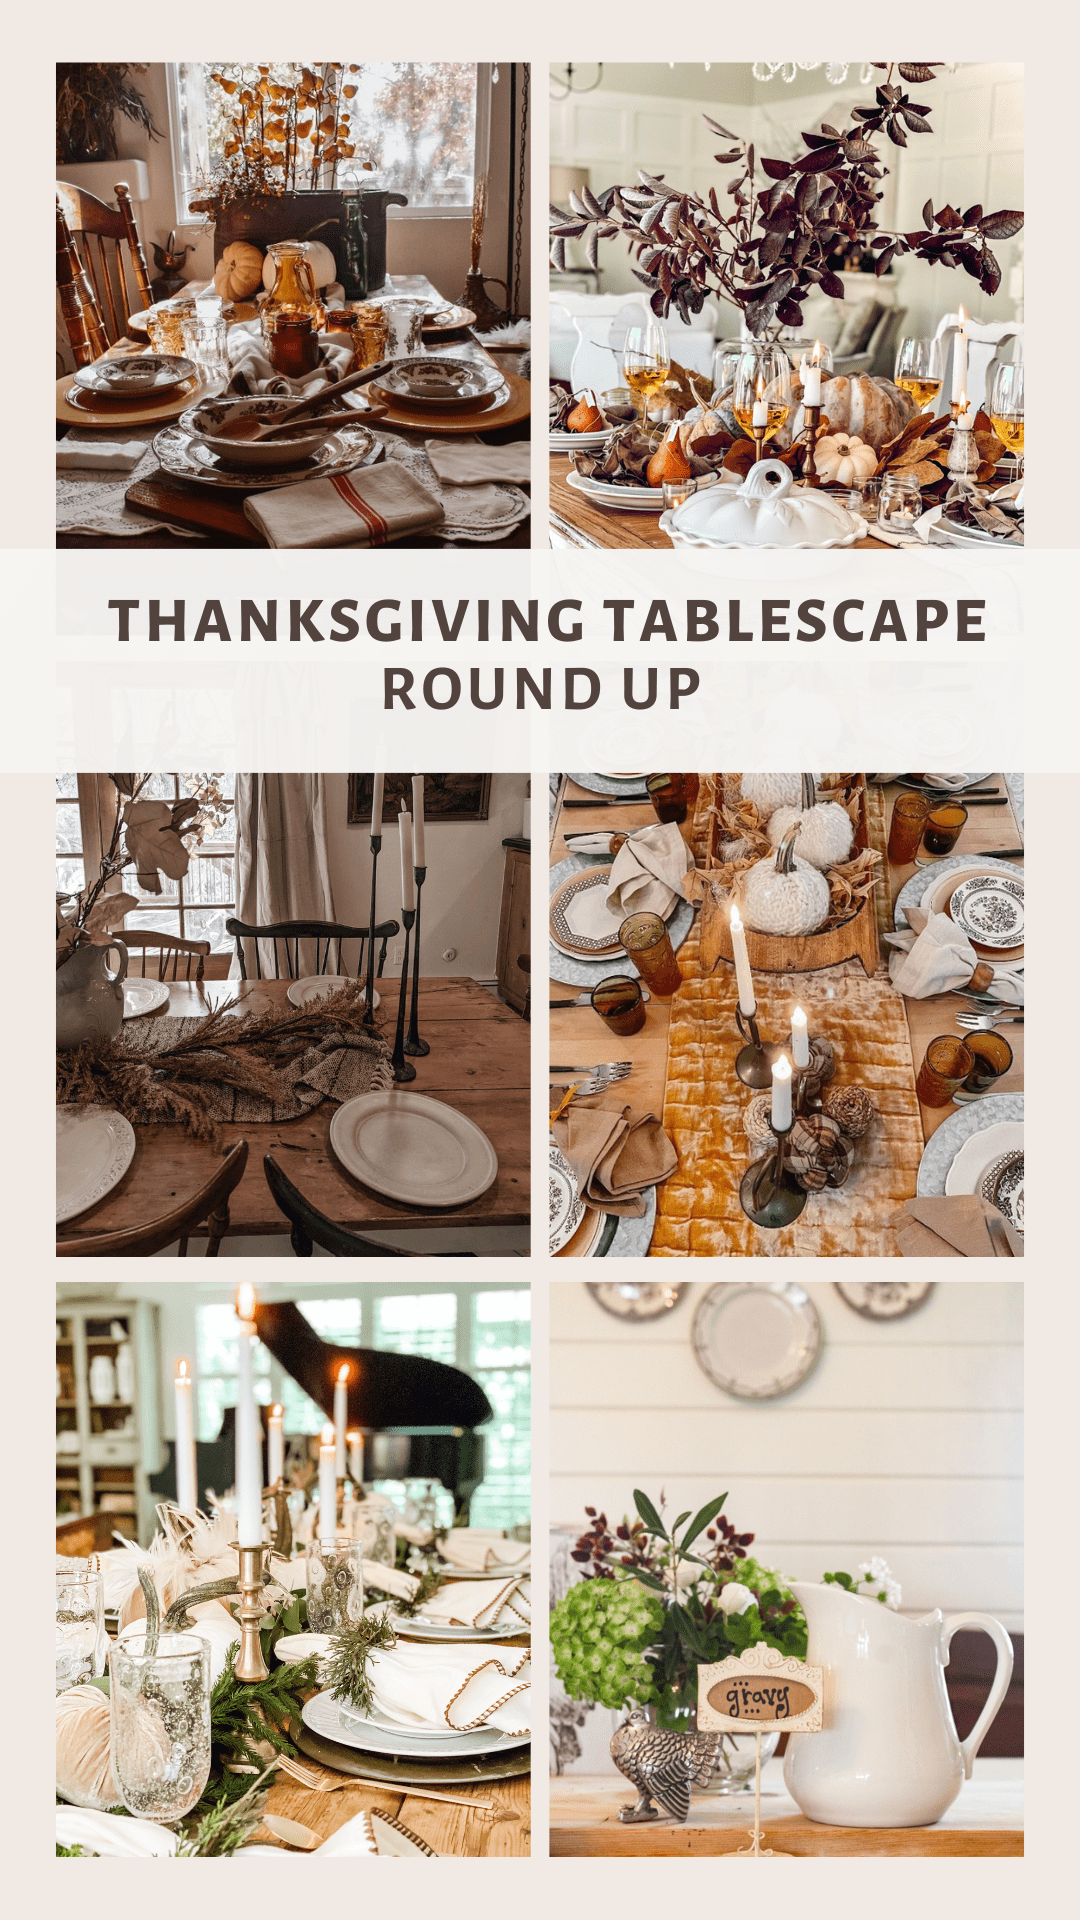 18 Beautiful Thanksgiving Table Decor Ideas for a Simple Holiday